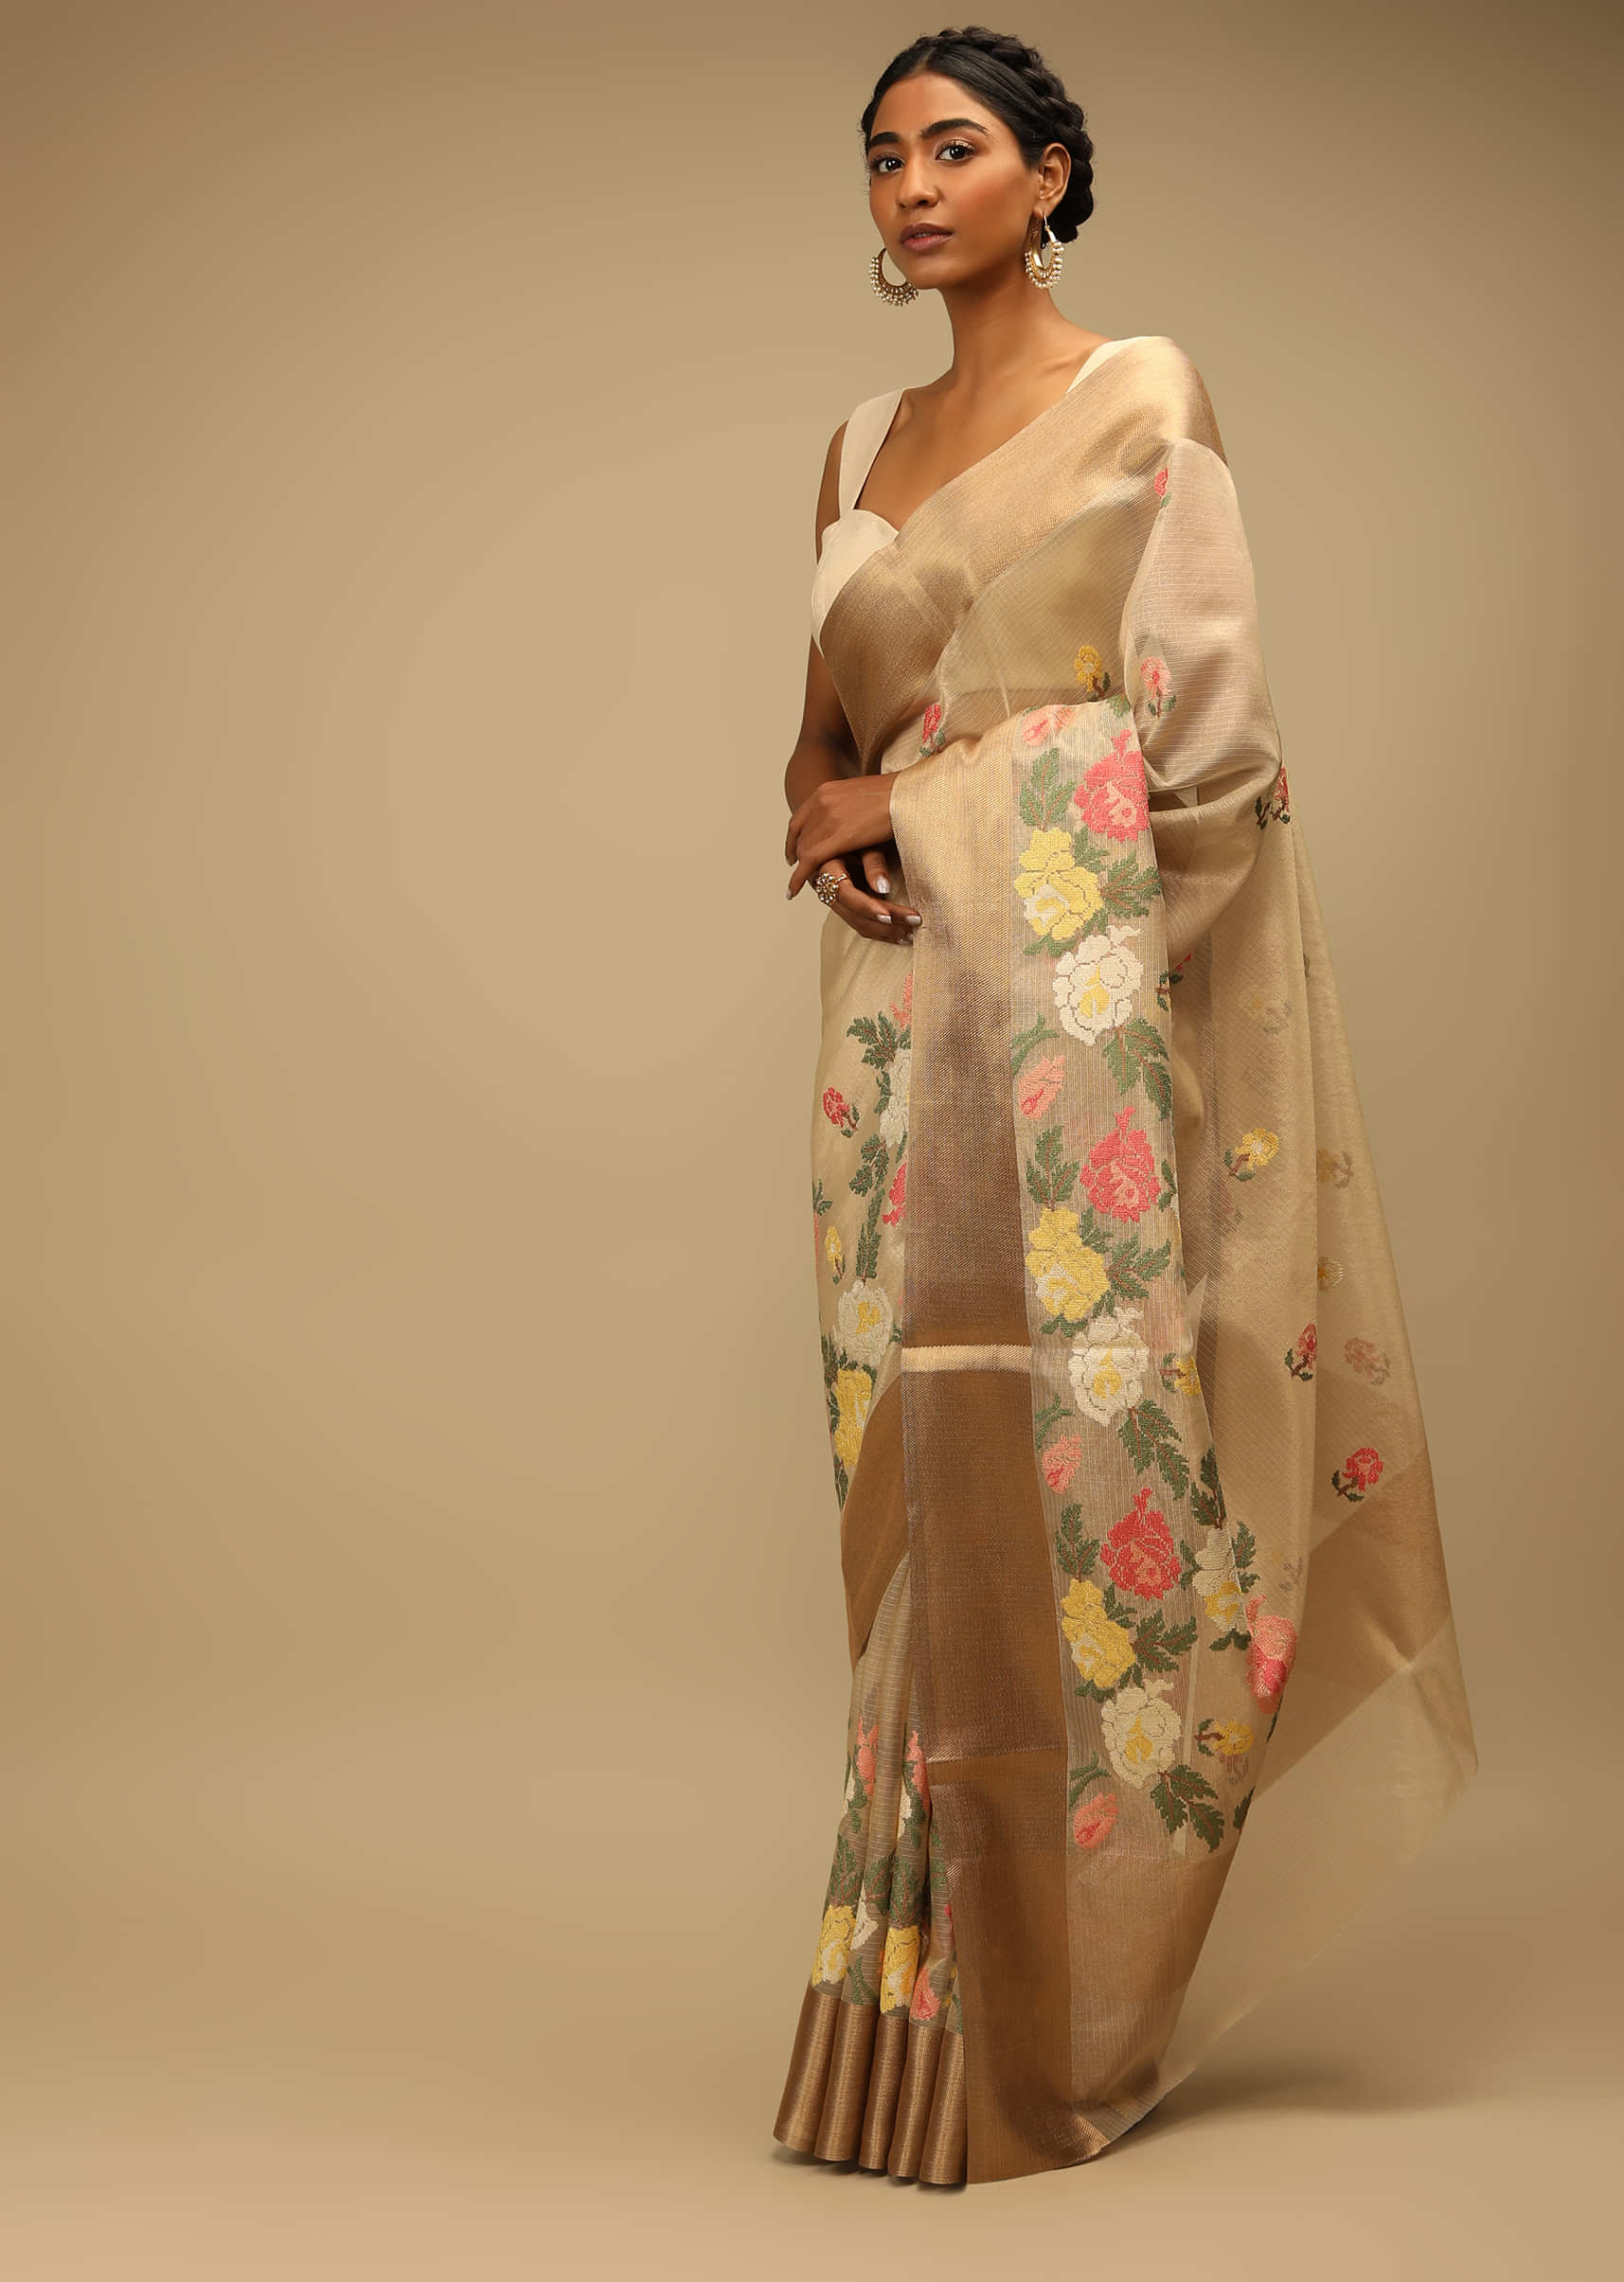 Gold Beige Saree In Zari Kota Silk With Multi Colored Resham Embroidered Flowers On The Border 